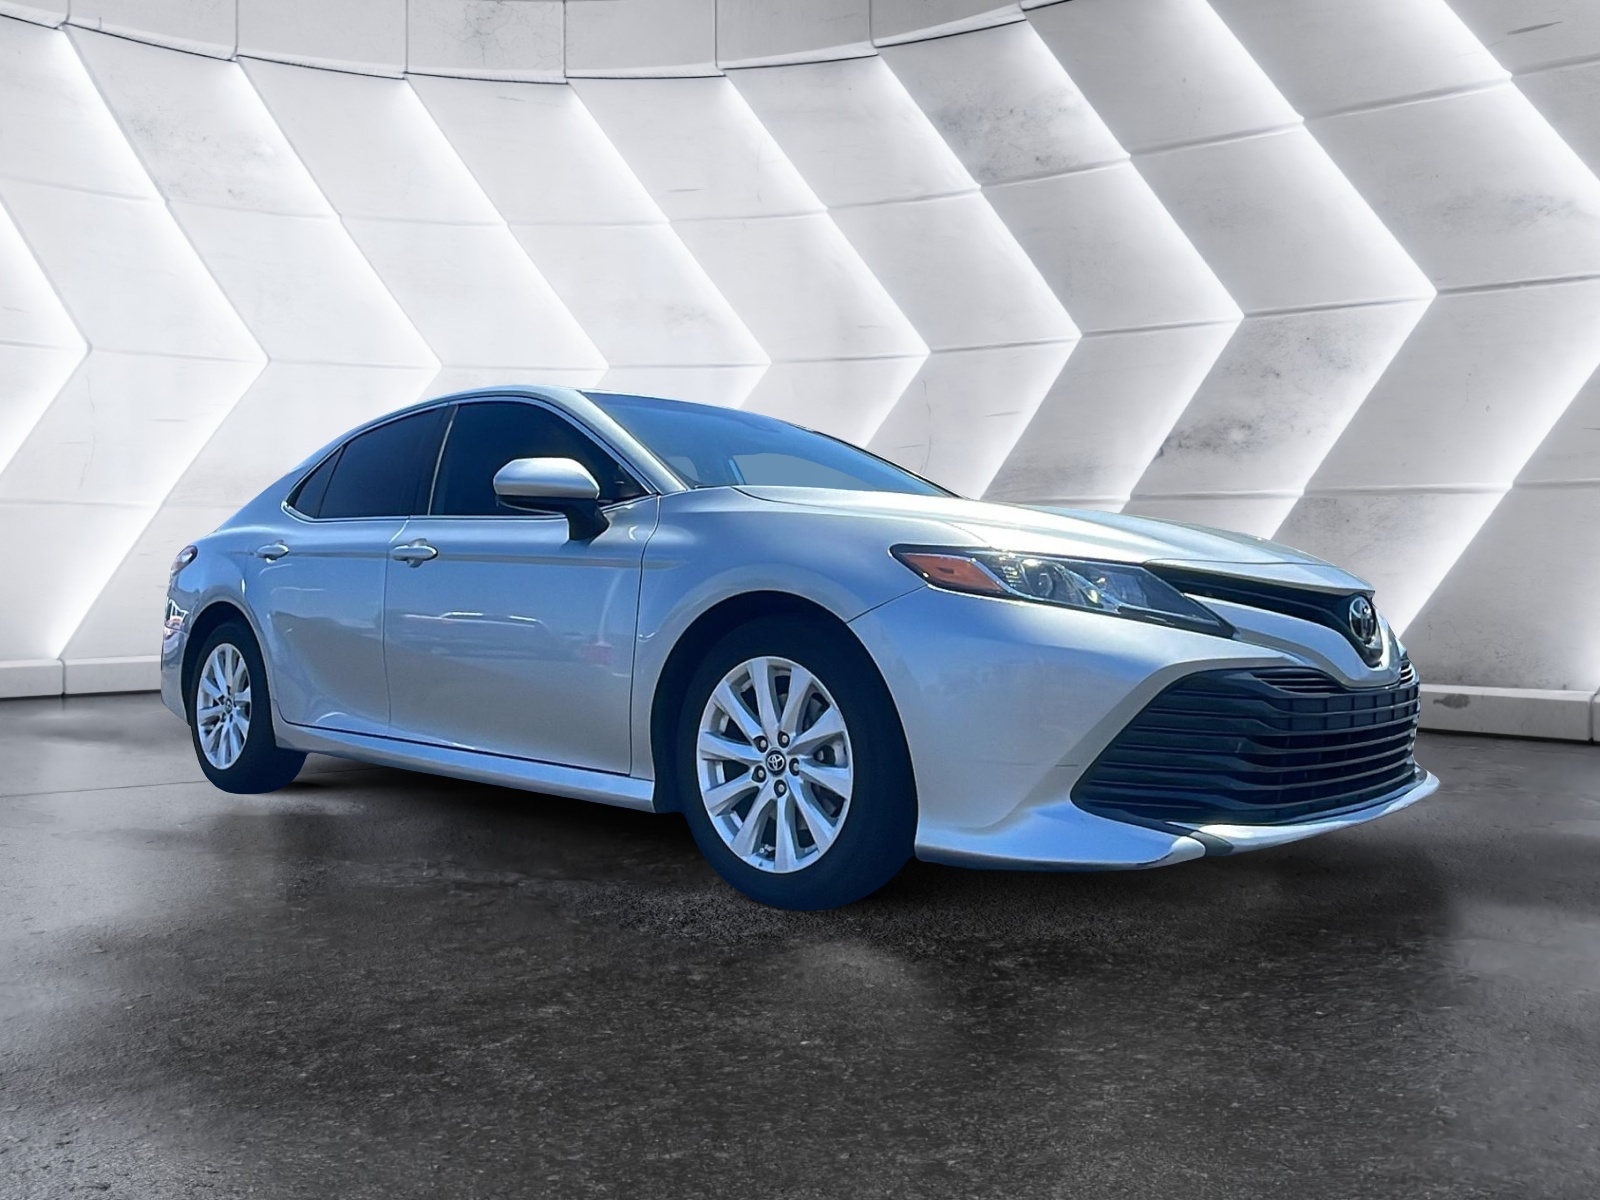 2020 Toyota Camry LE 1